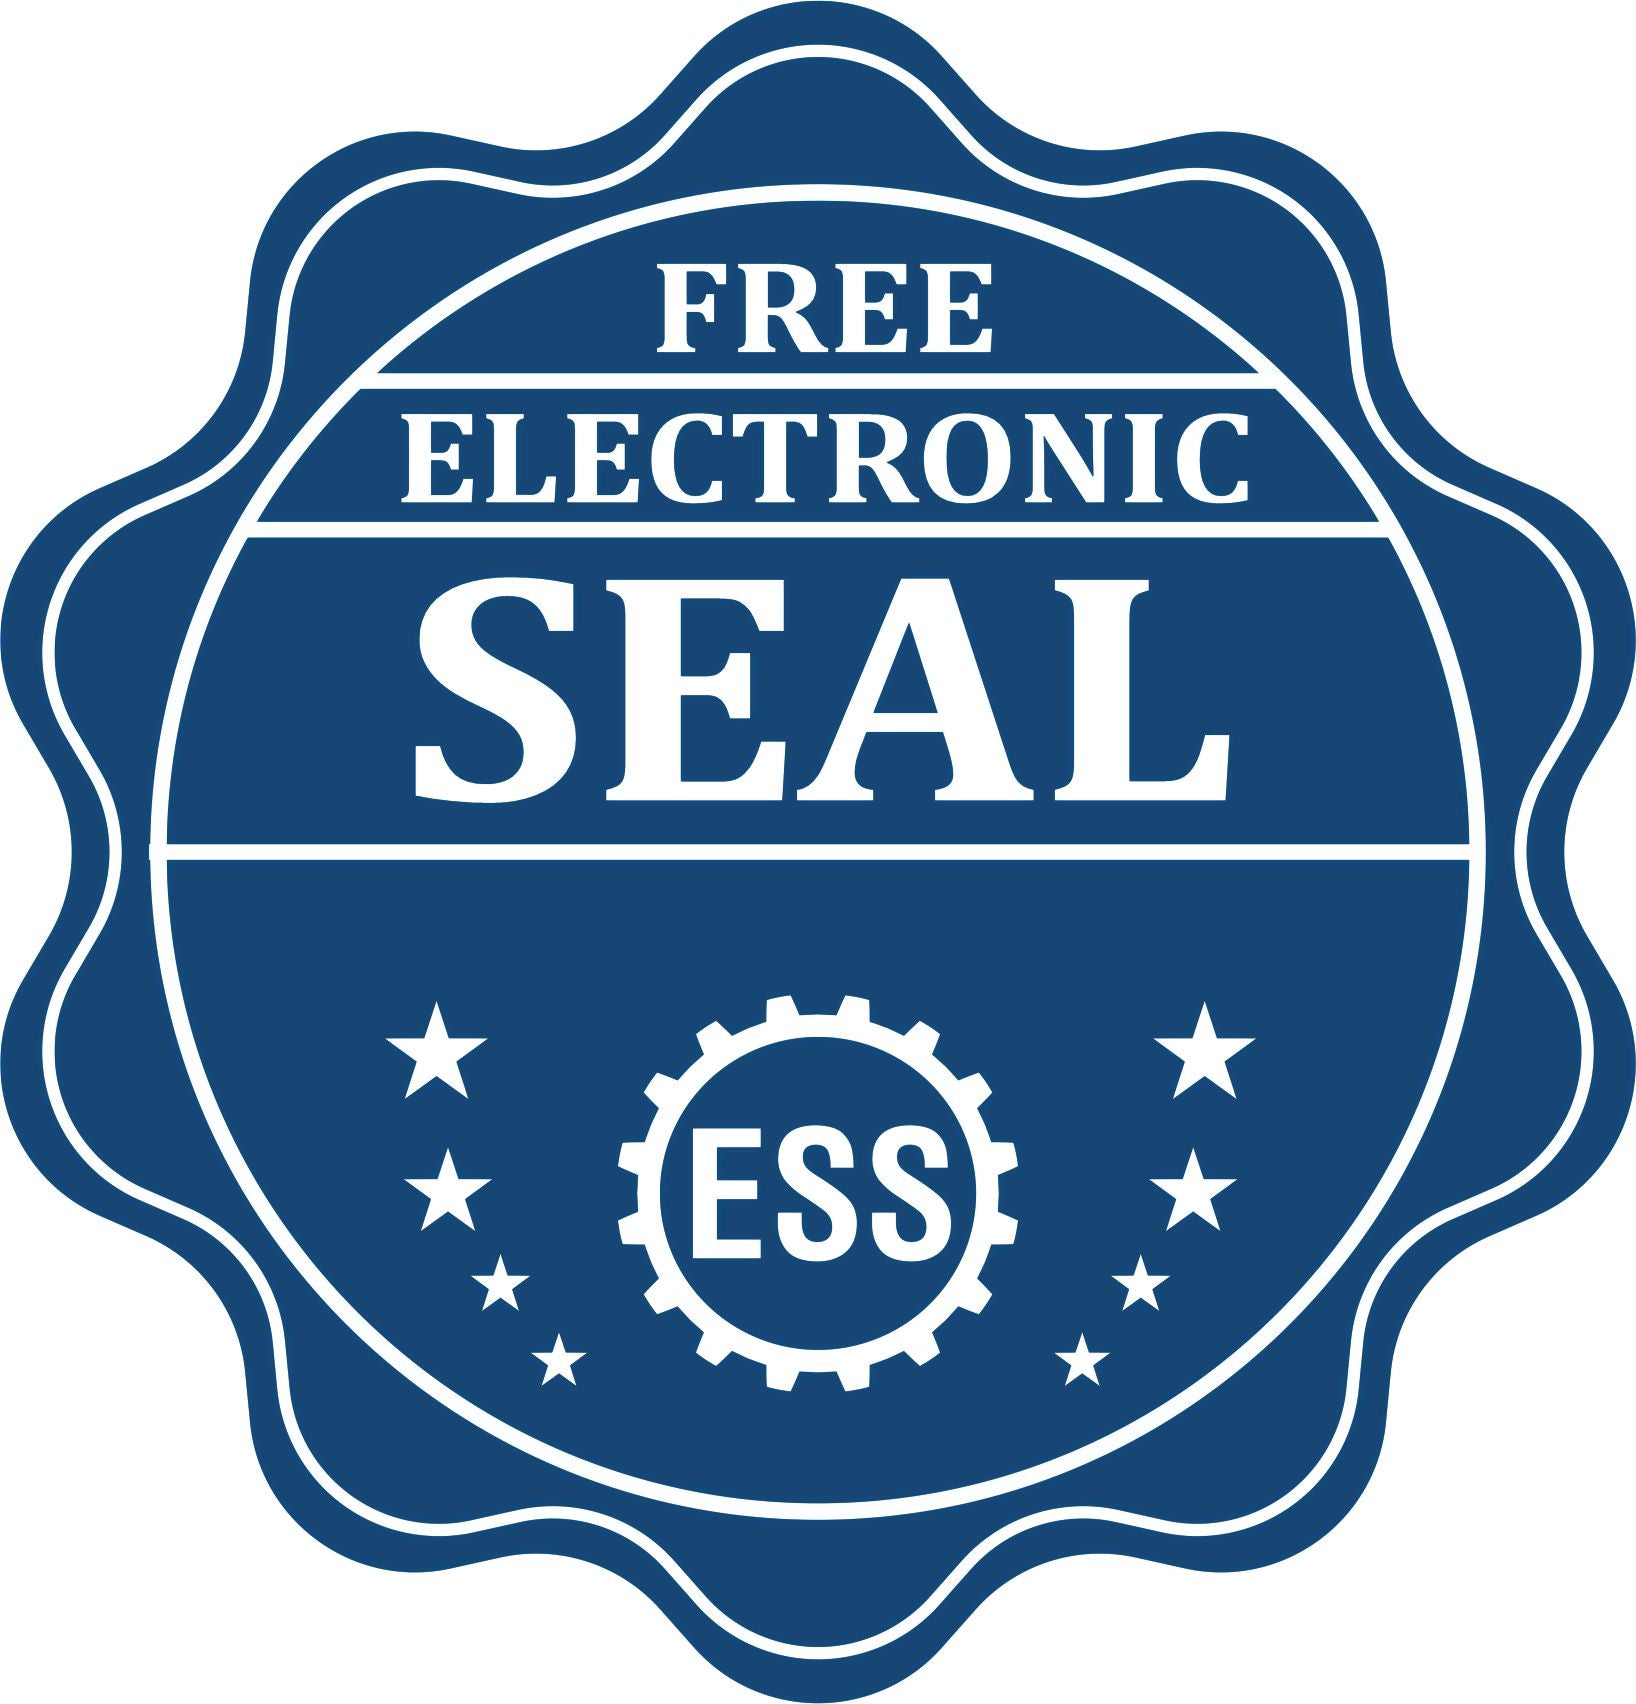 A badge showing a free electronic seal for the Florida Professional Engineer Seal Stamp with stars and the ESS gear on the emblem.